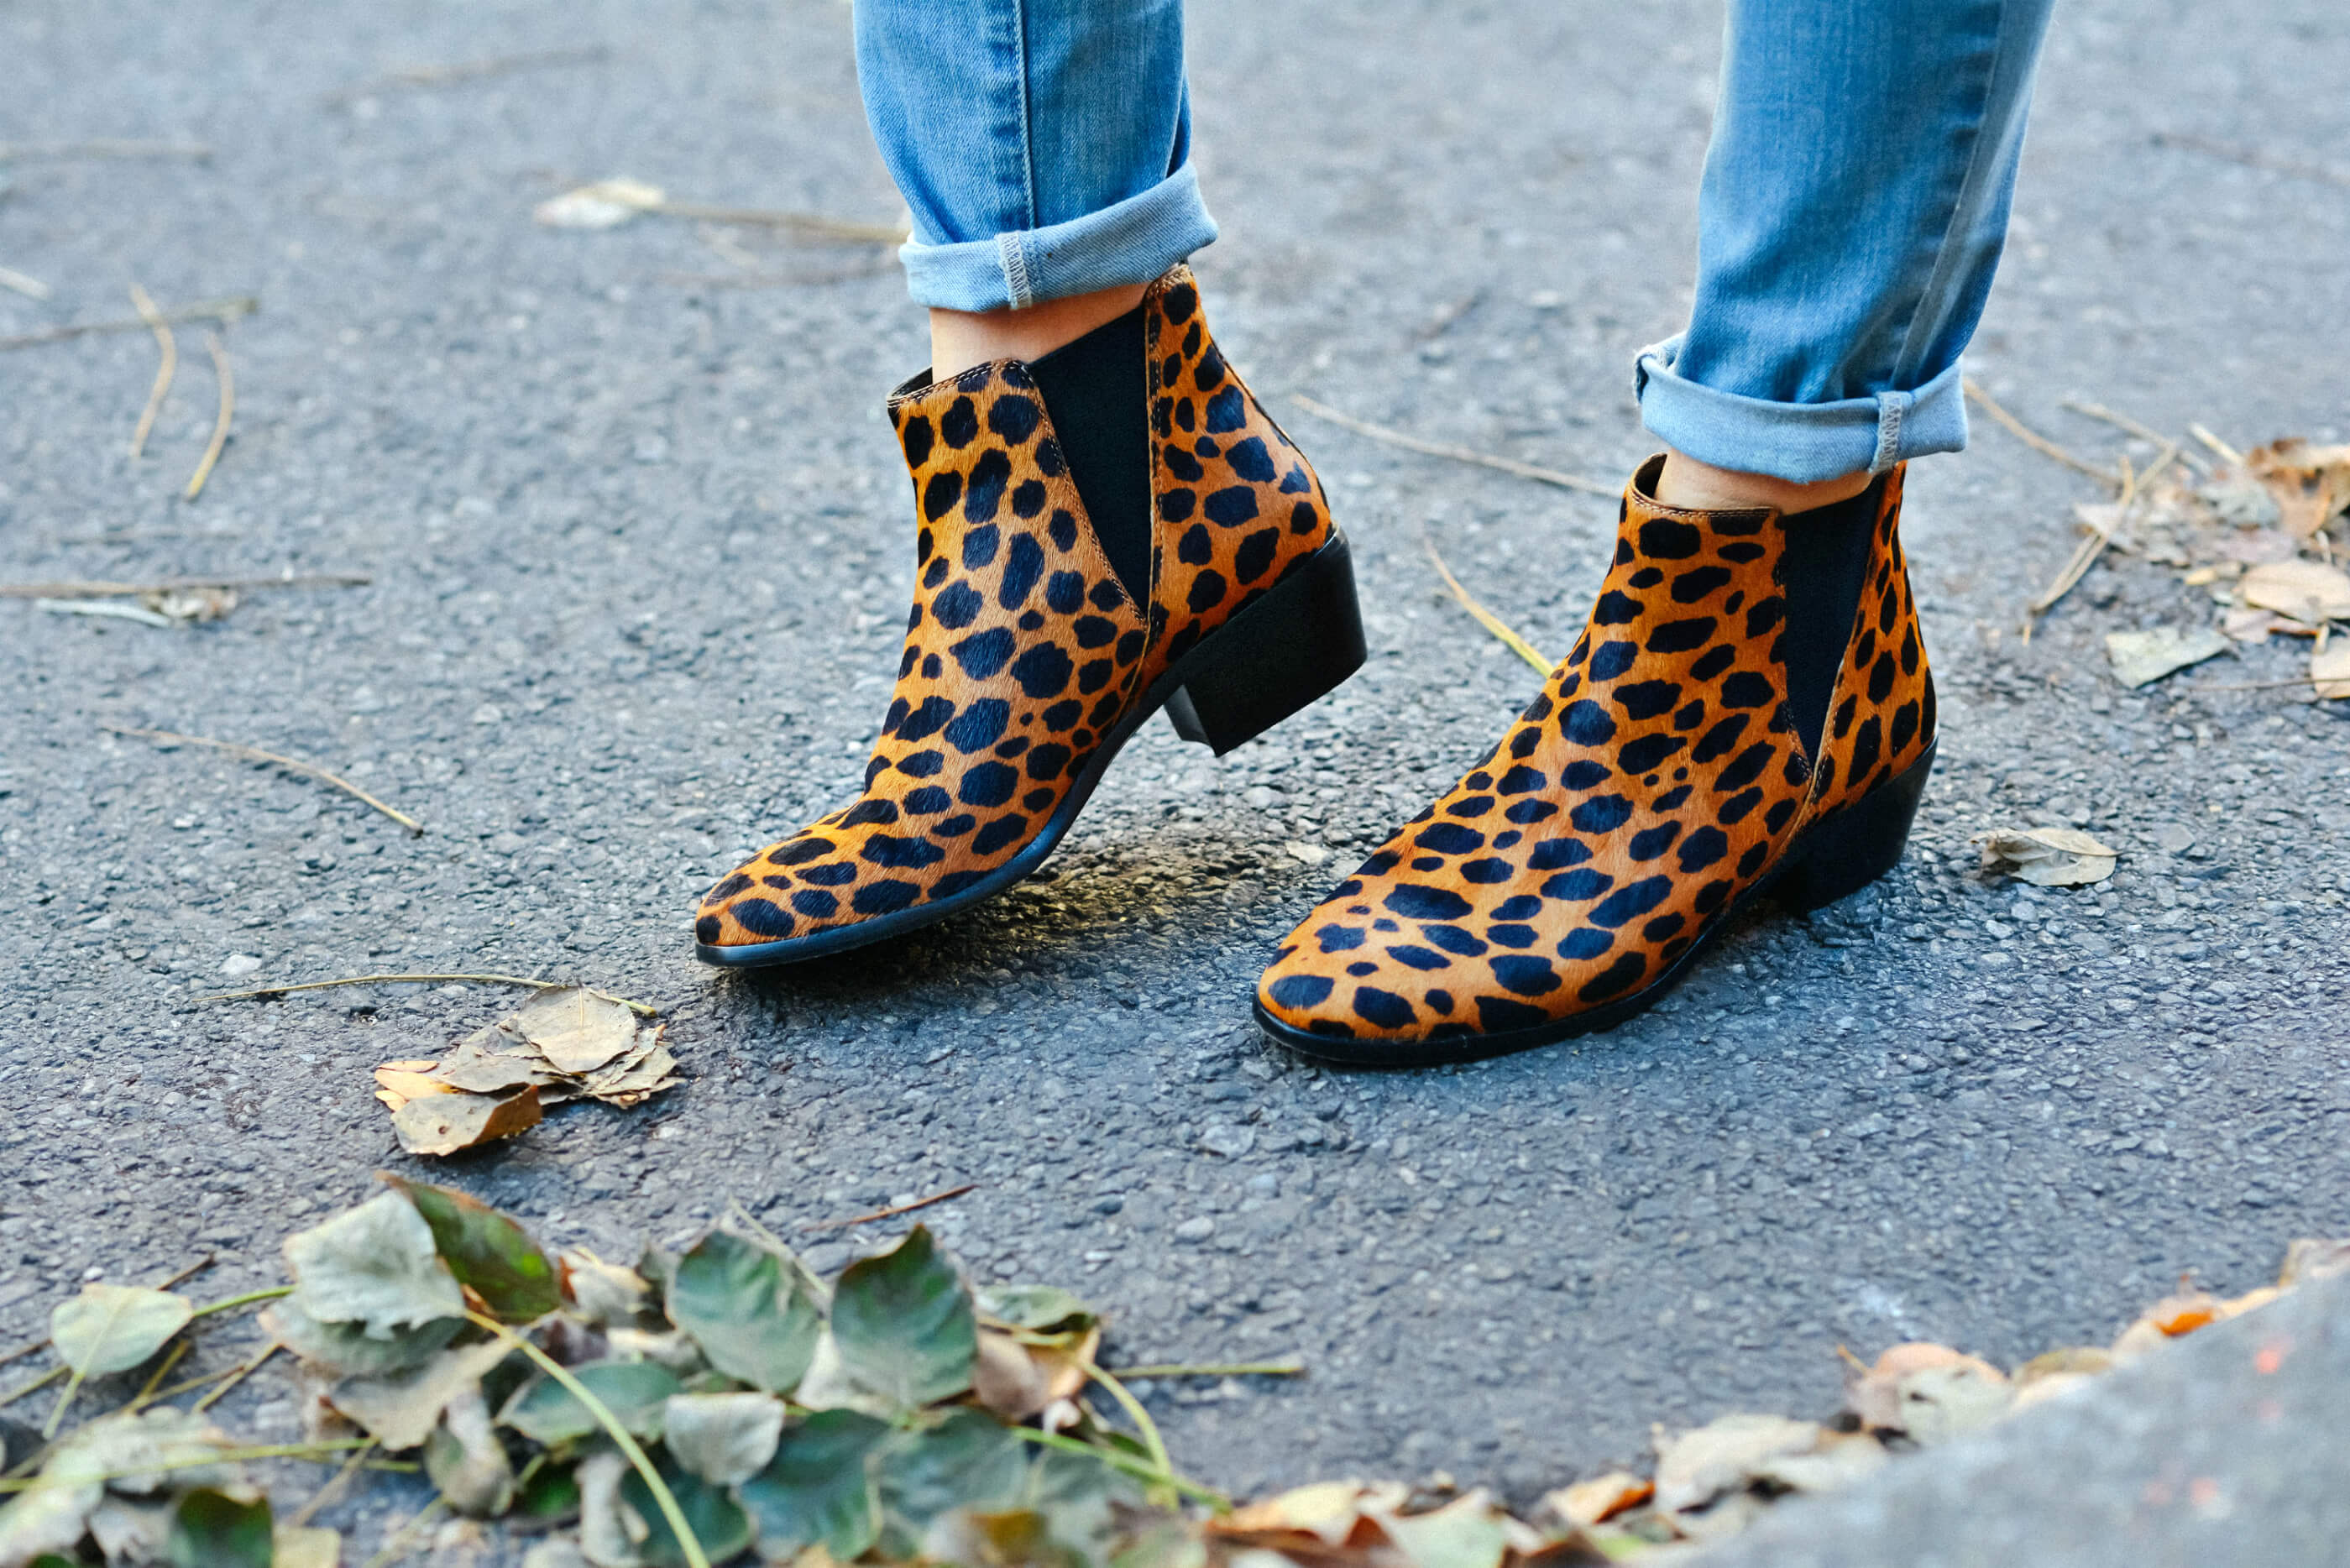 Vince Camuto Cheetah/Leopard Boots, Tilden of To Be Bright